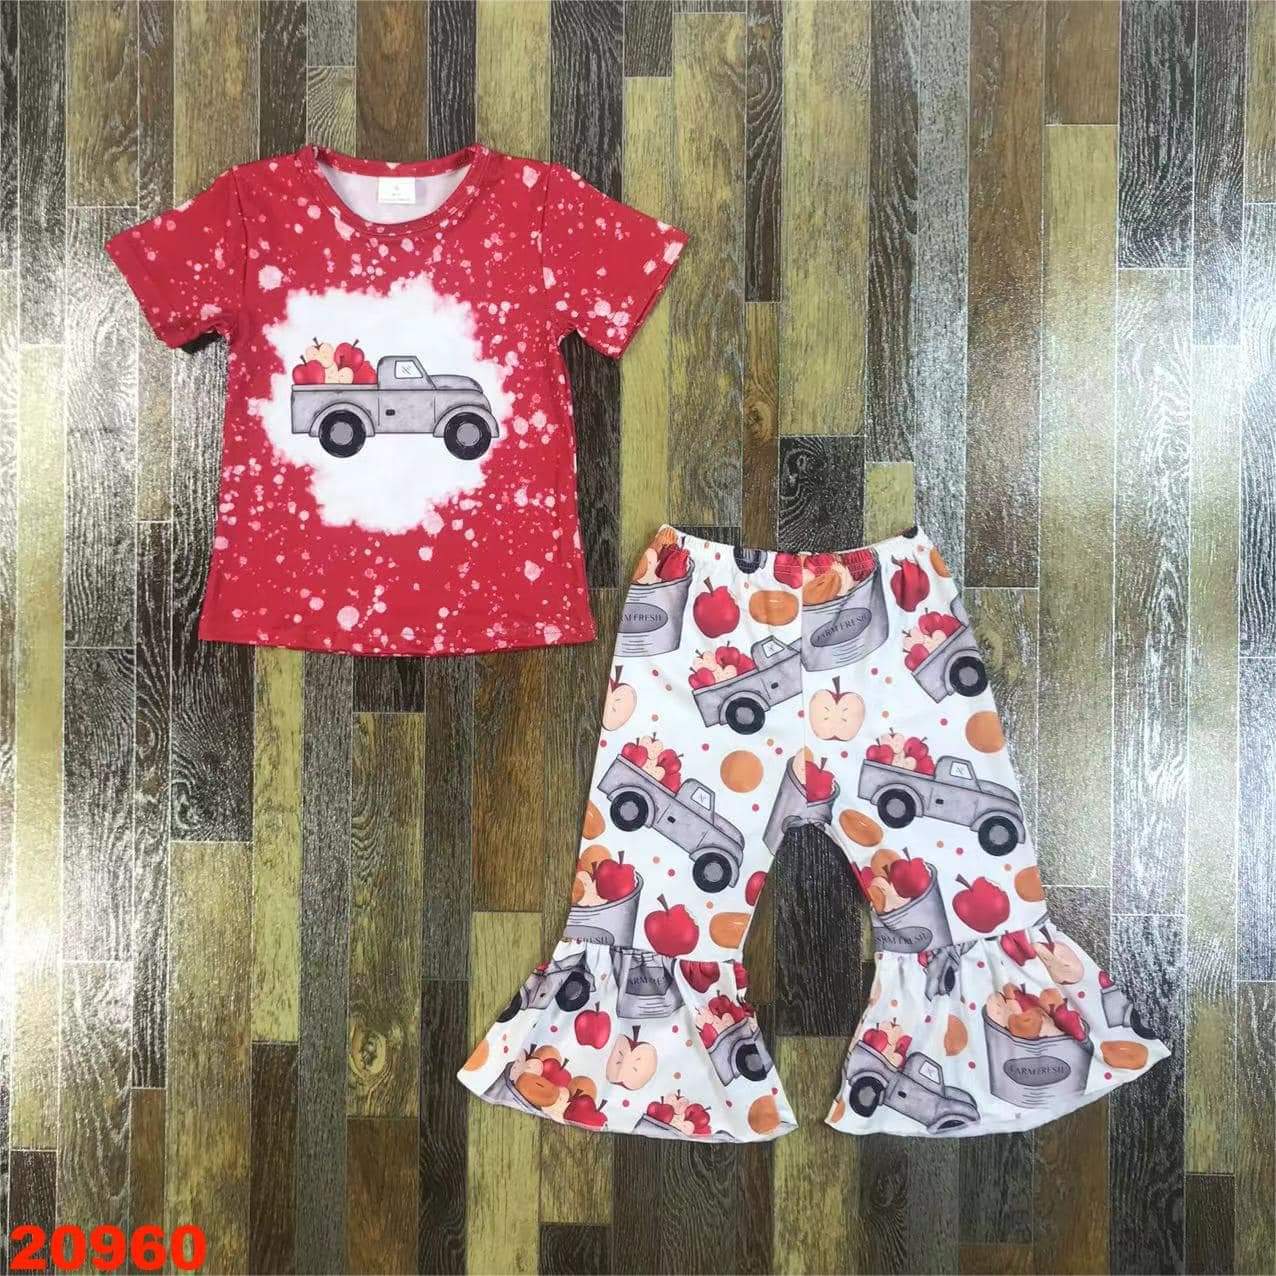 Truck Load of Apples Pant Set ♡ Ships in Approx 3-4 weeks {Custom Made}